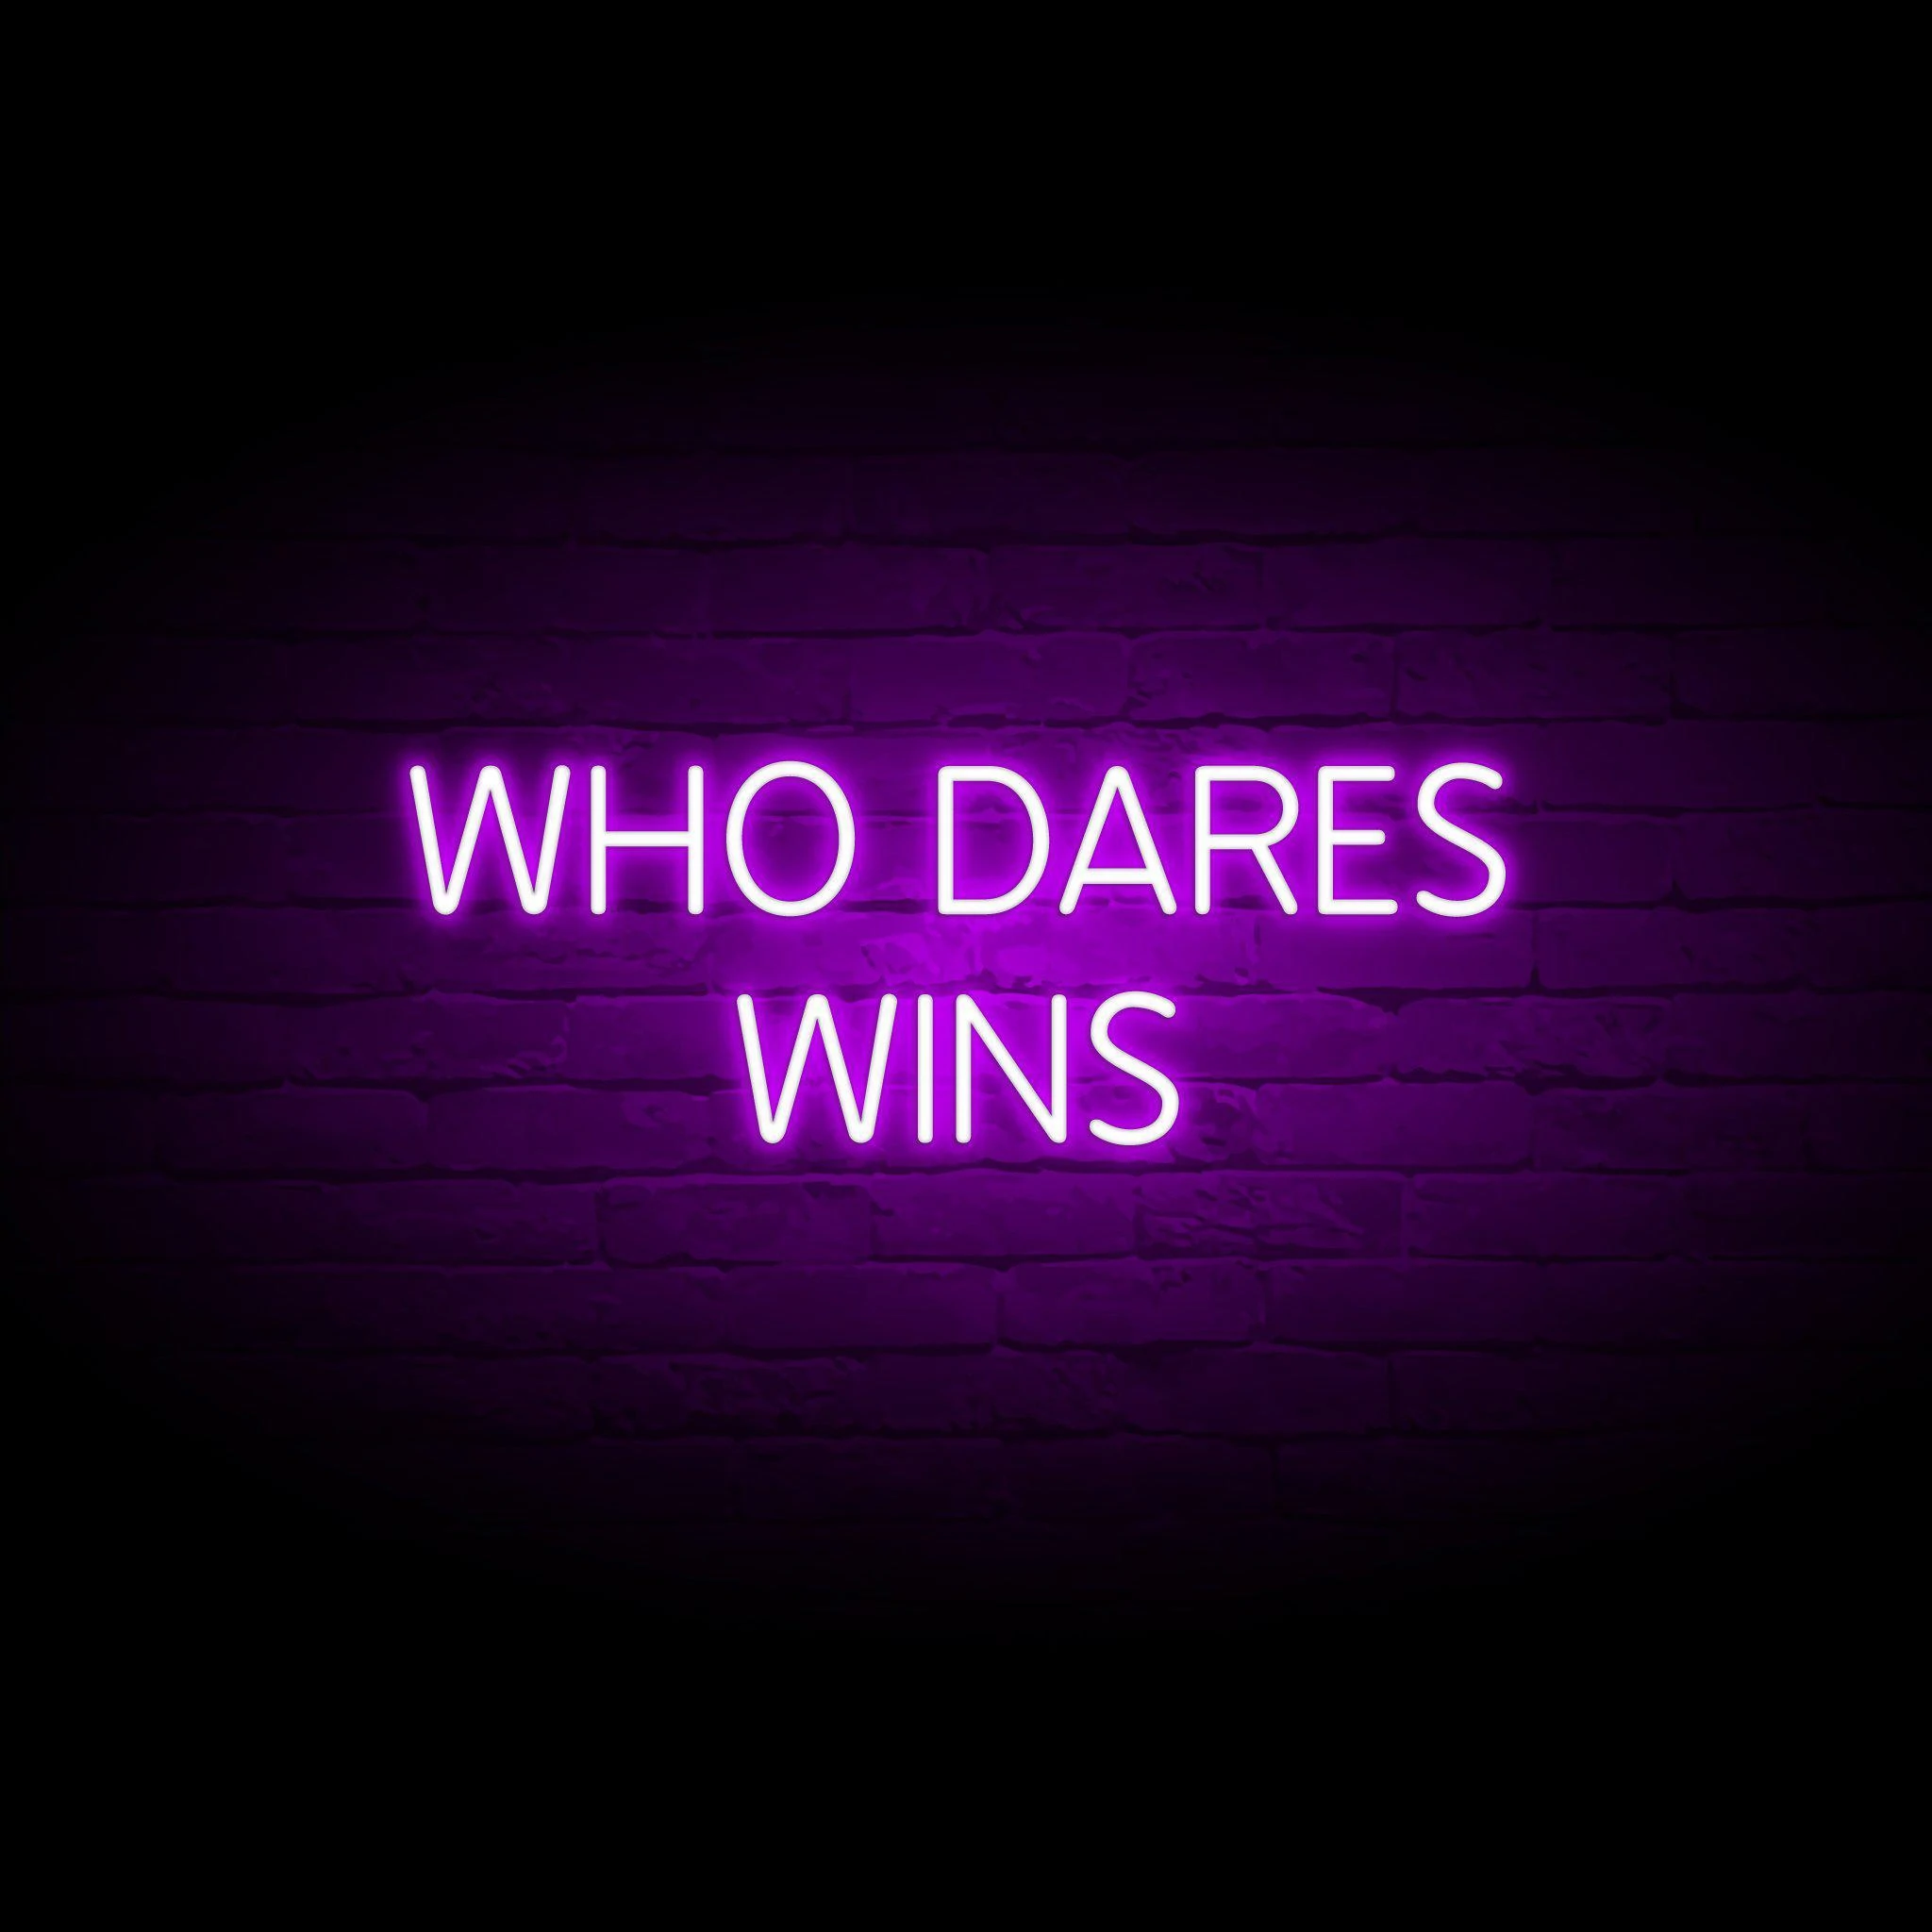 'WHO DARES WINS' NEON SIGN